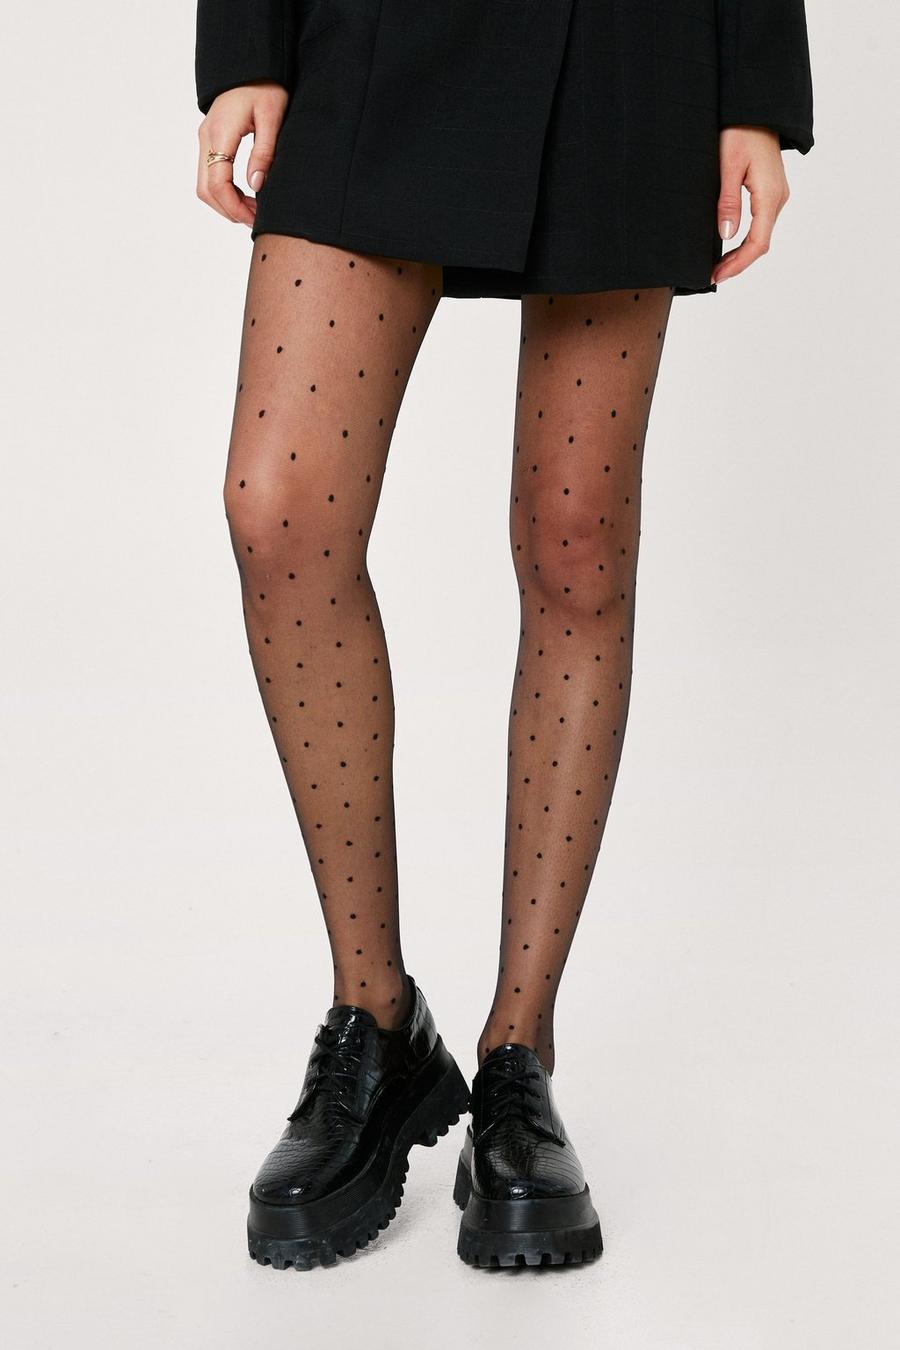 Sheer 2 Pc Heart and Spotty Print Tights Set